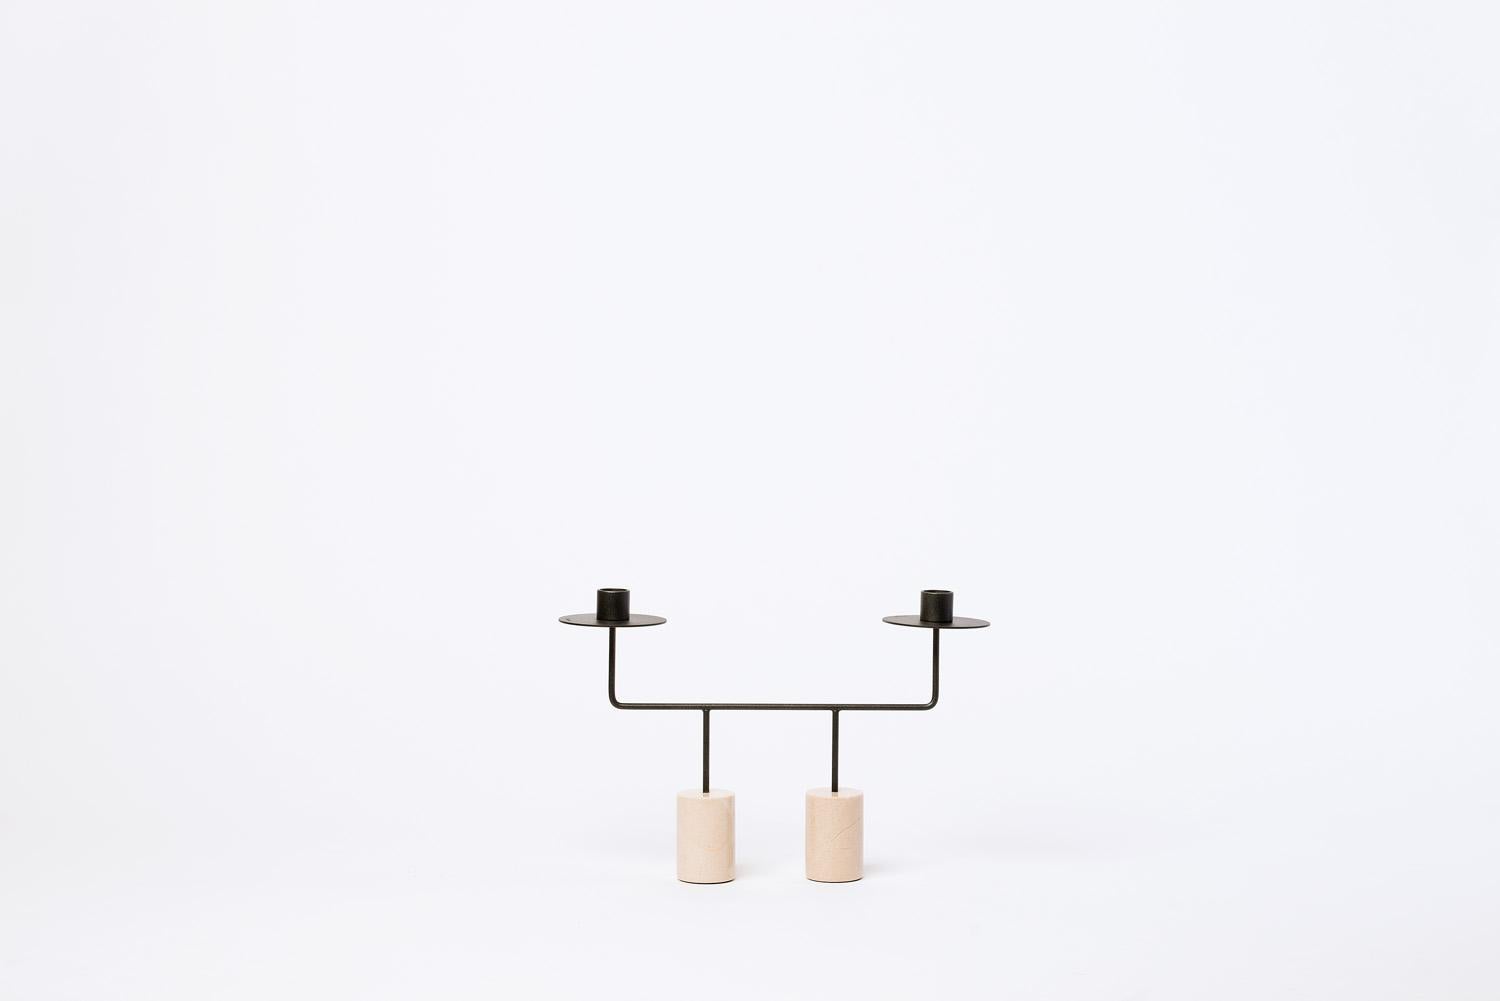 The Constellation candle holder series mark the first collaboration of GAIA&GINO and Porto based Designer Christian Haas. The designs derive their beauty from the interaction between tubular stone weights and slim metallic structures that seem like